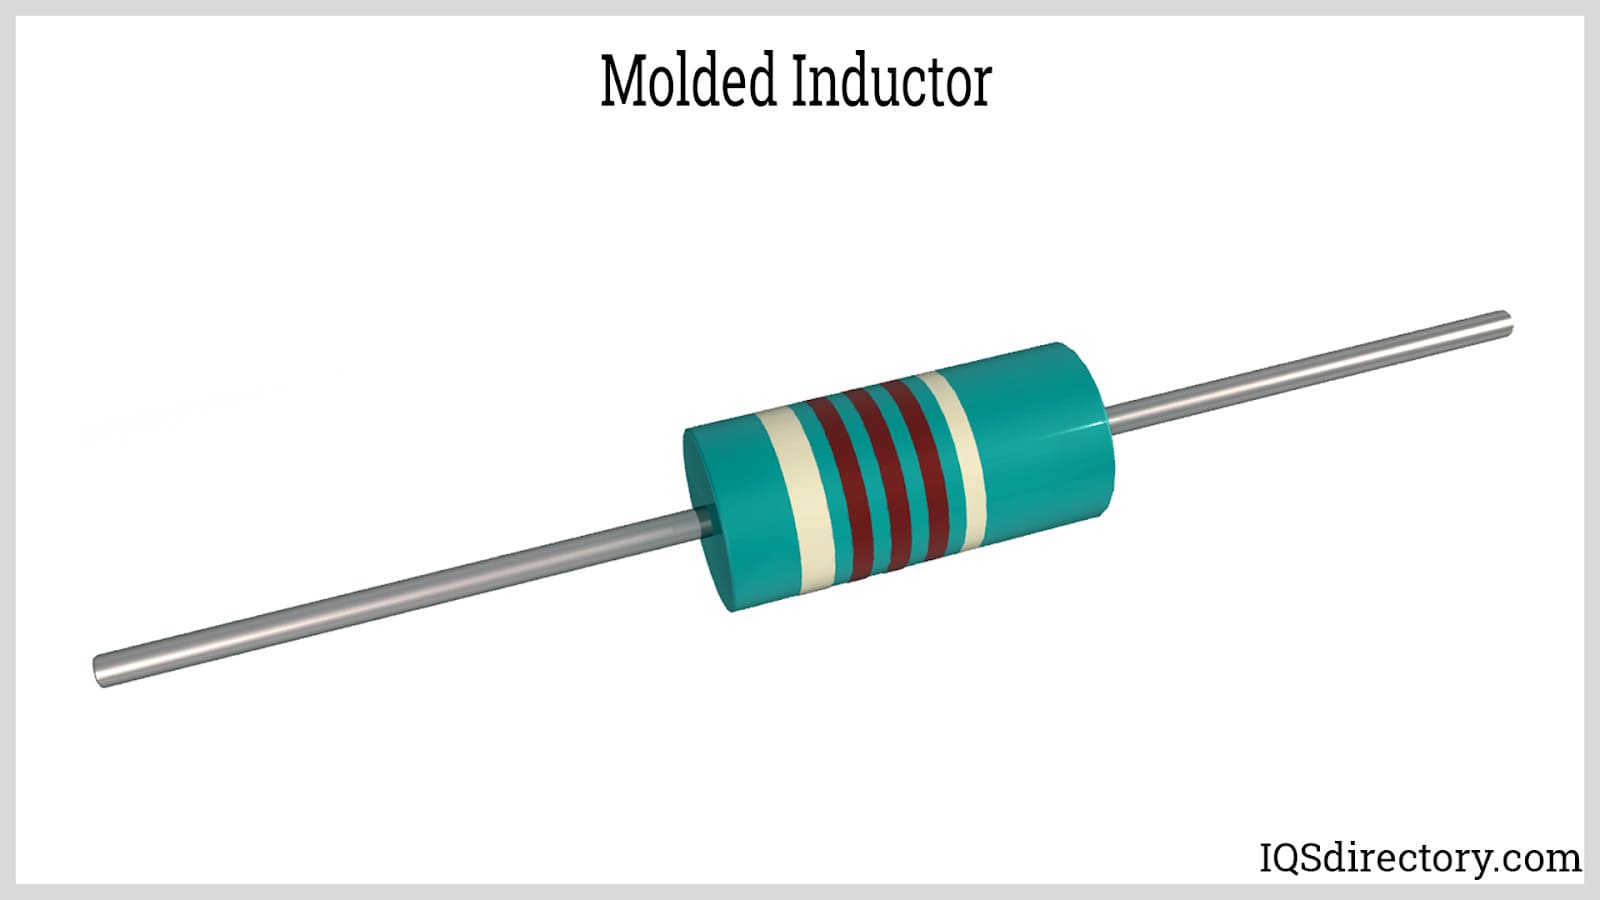 Molded Inductor